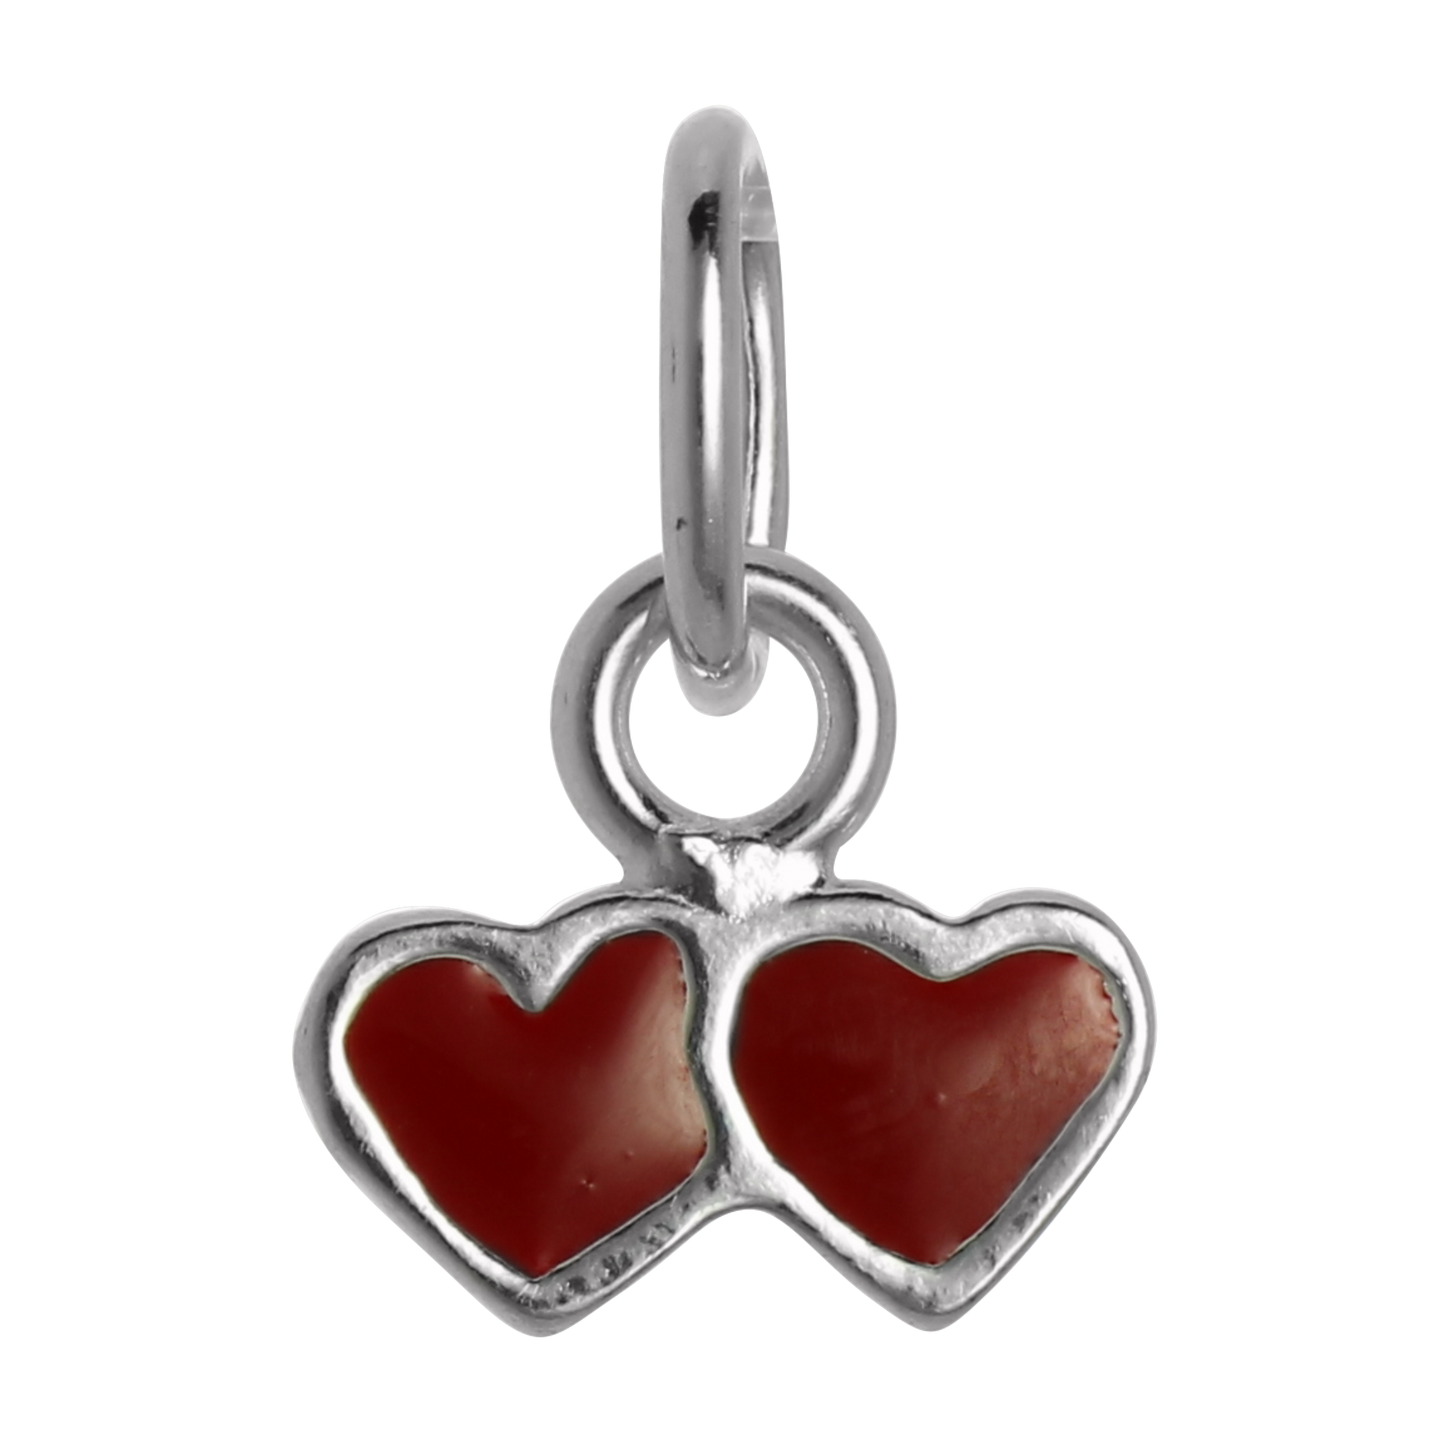 Tiny Sterling Silver & Red Enamel Double Heart Charm